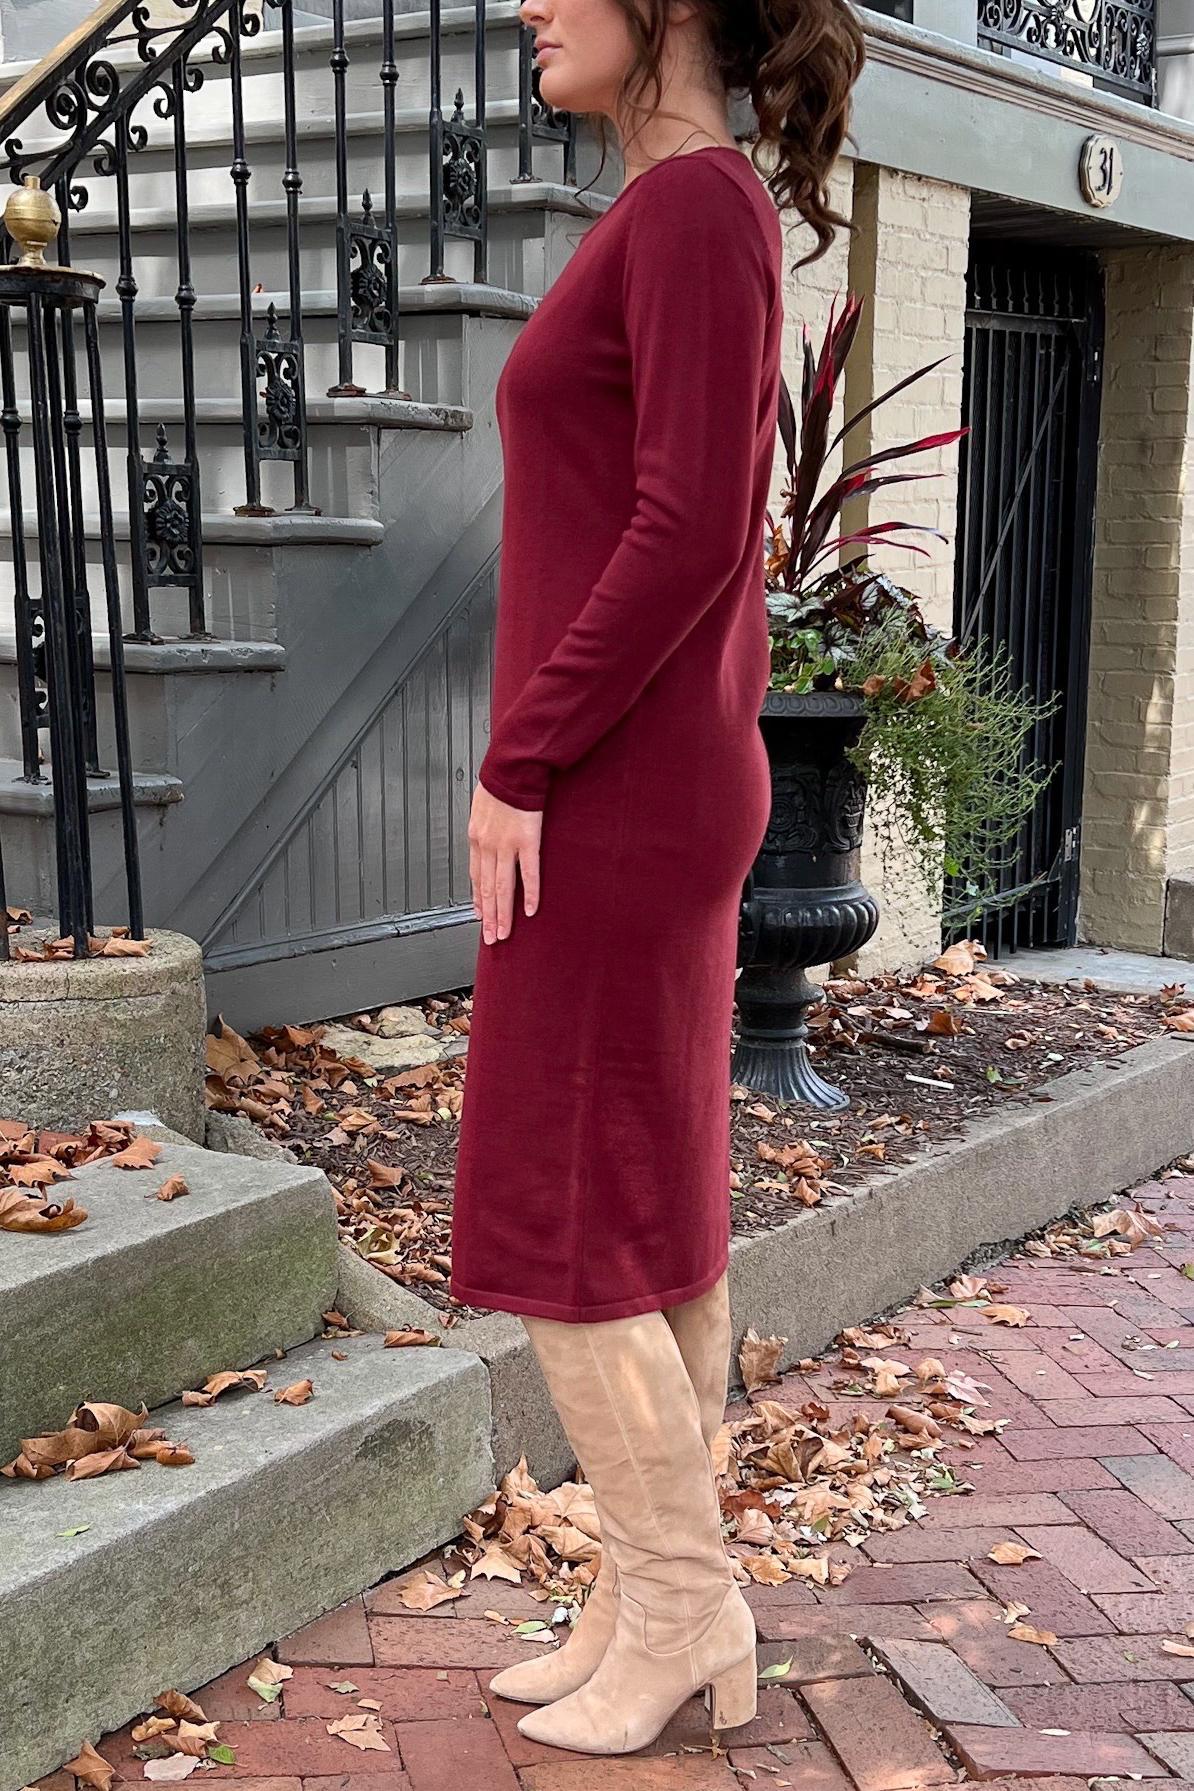 THE QUINN EVERYDAY SCOOP NECK SWEATER DRESS IN BURGUNDY (FINAL SALE)